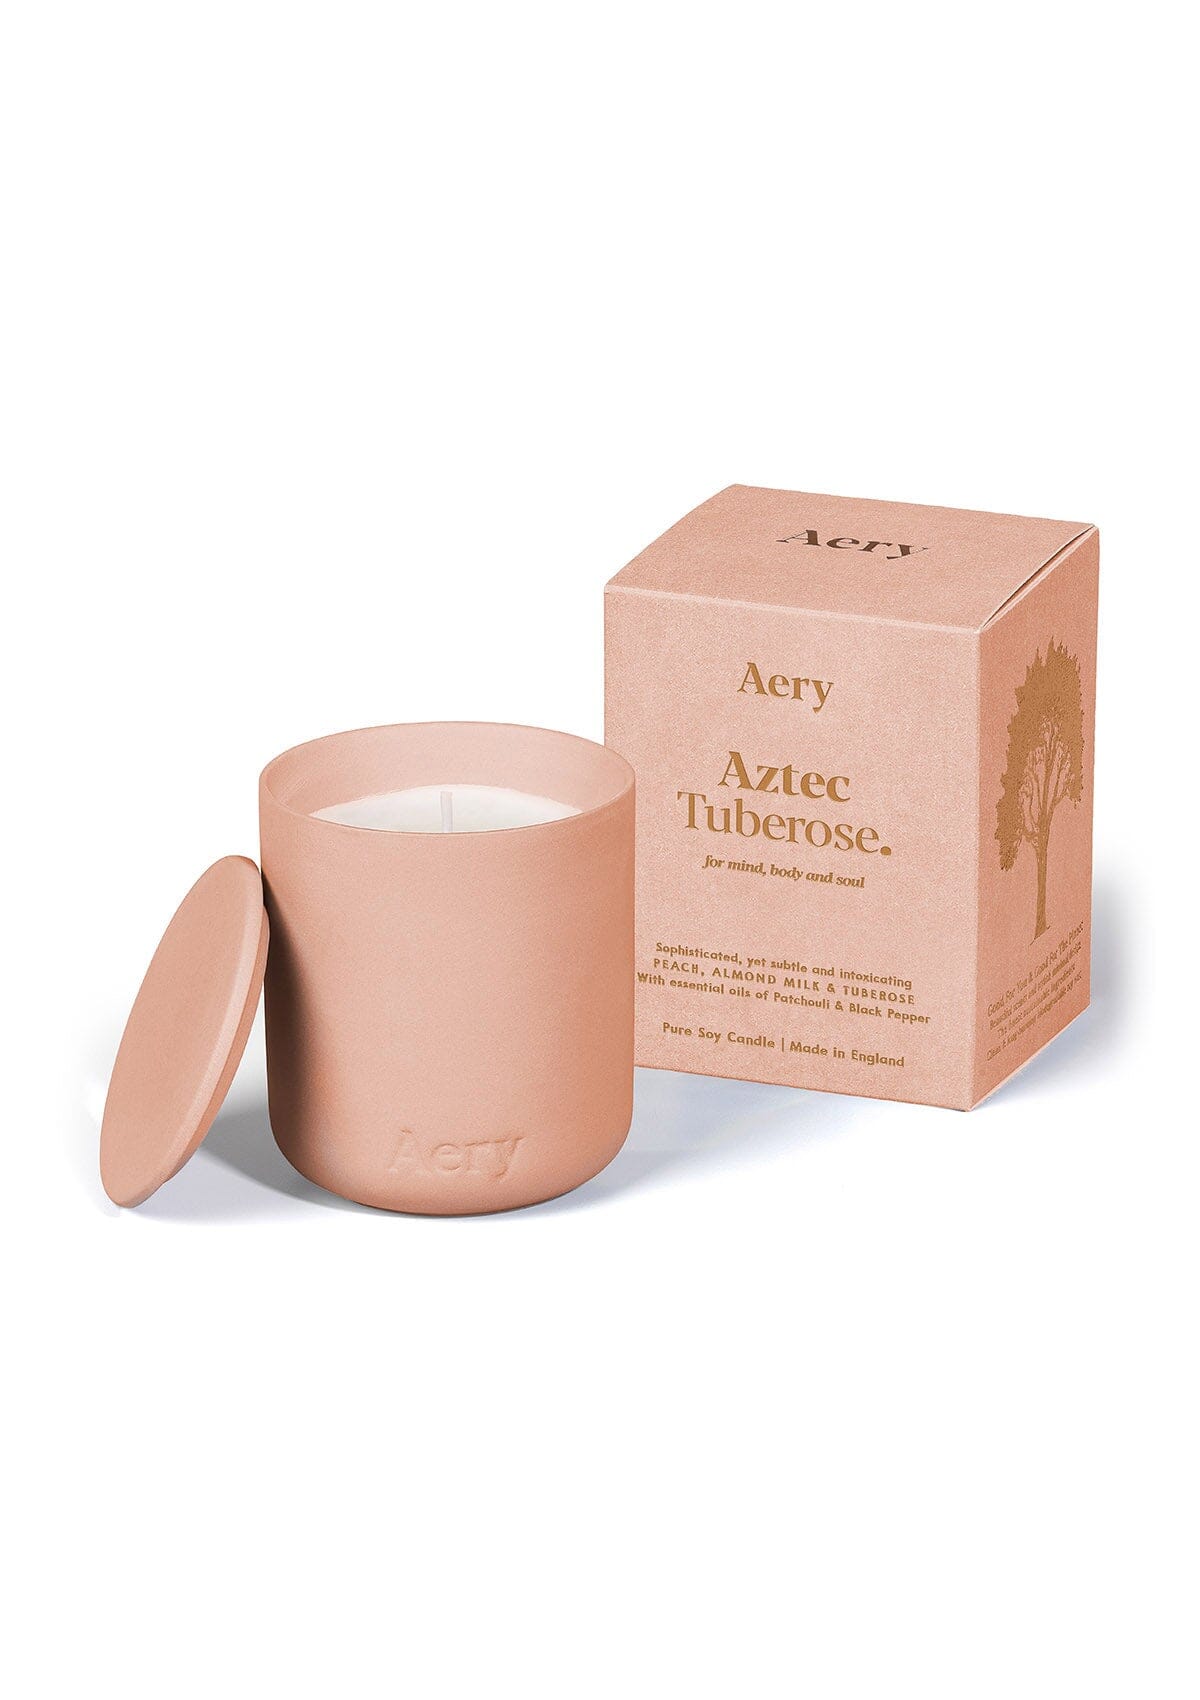 Peach Aztec Tuberose ceramic scented candle  by Aery on white background 